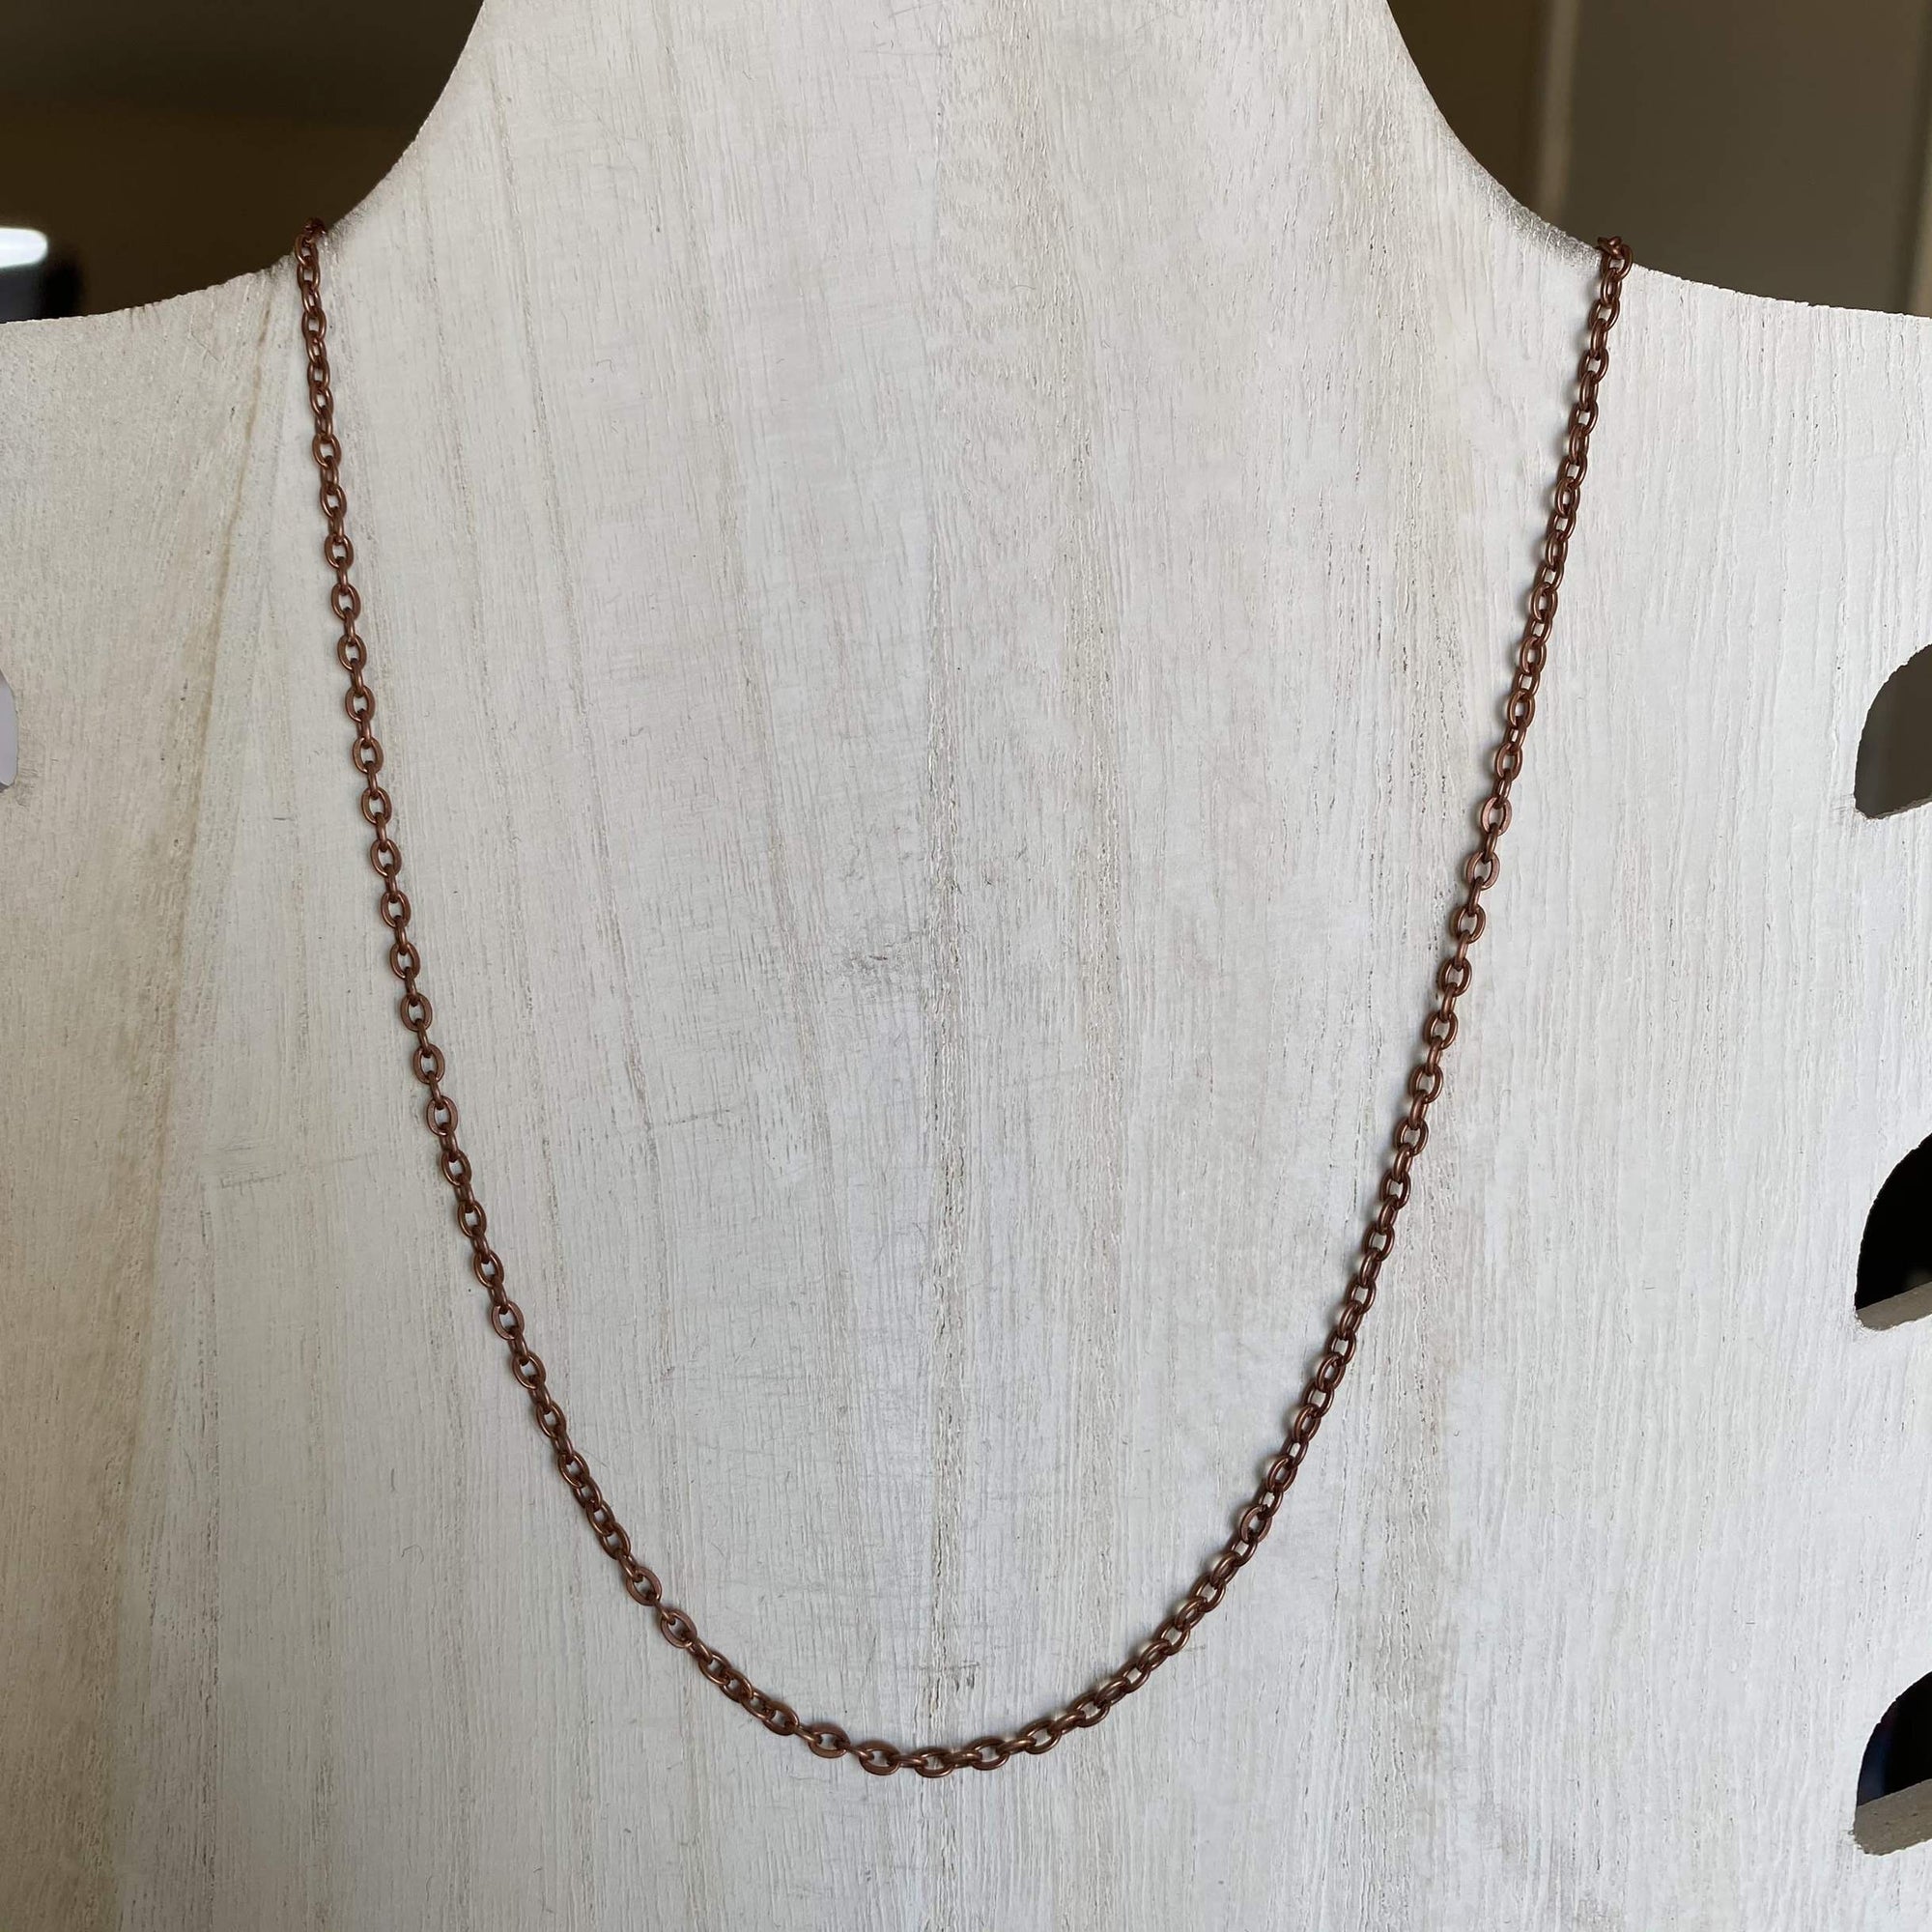 Red Copper Necklace Chain - 24in